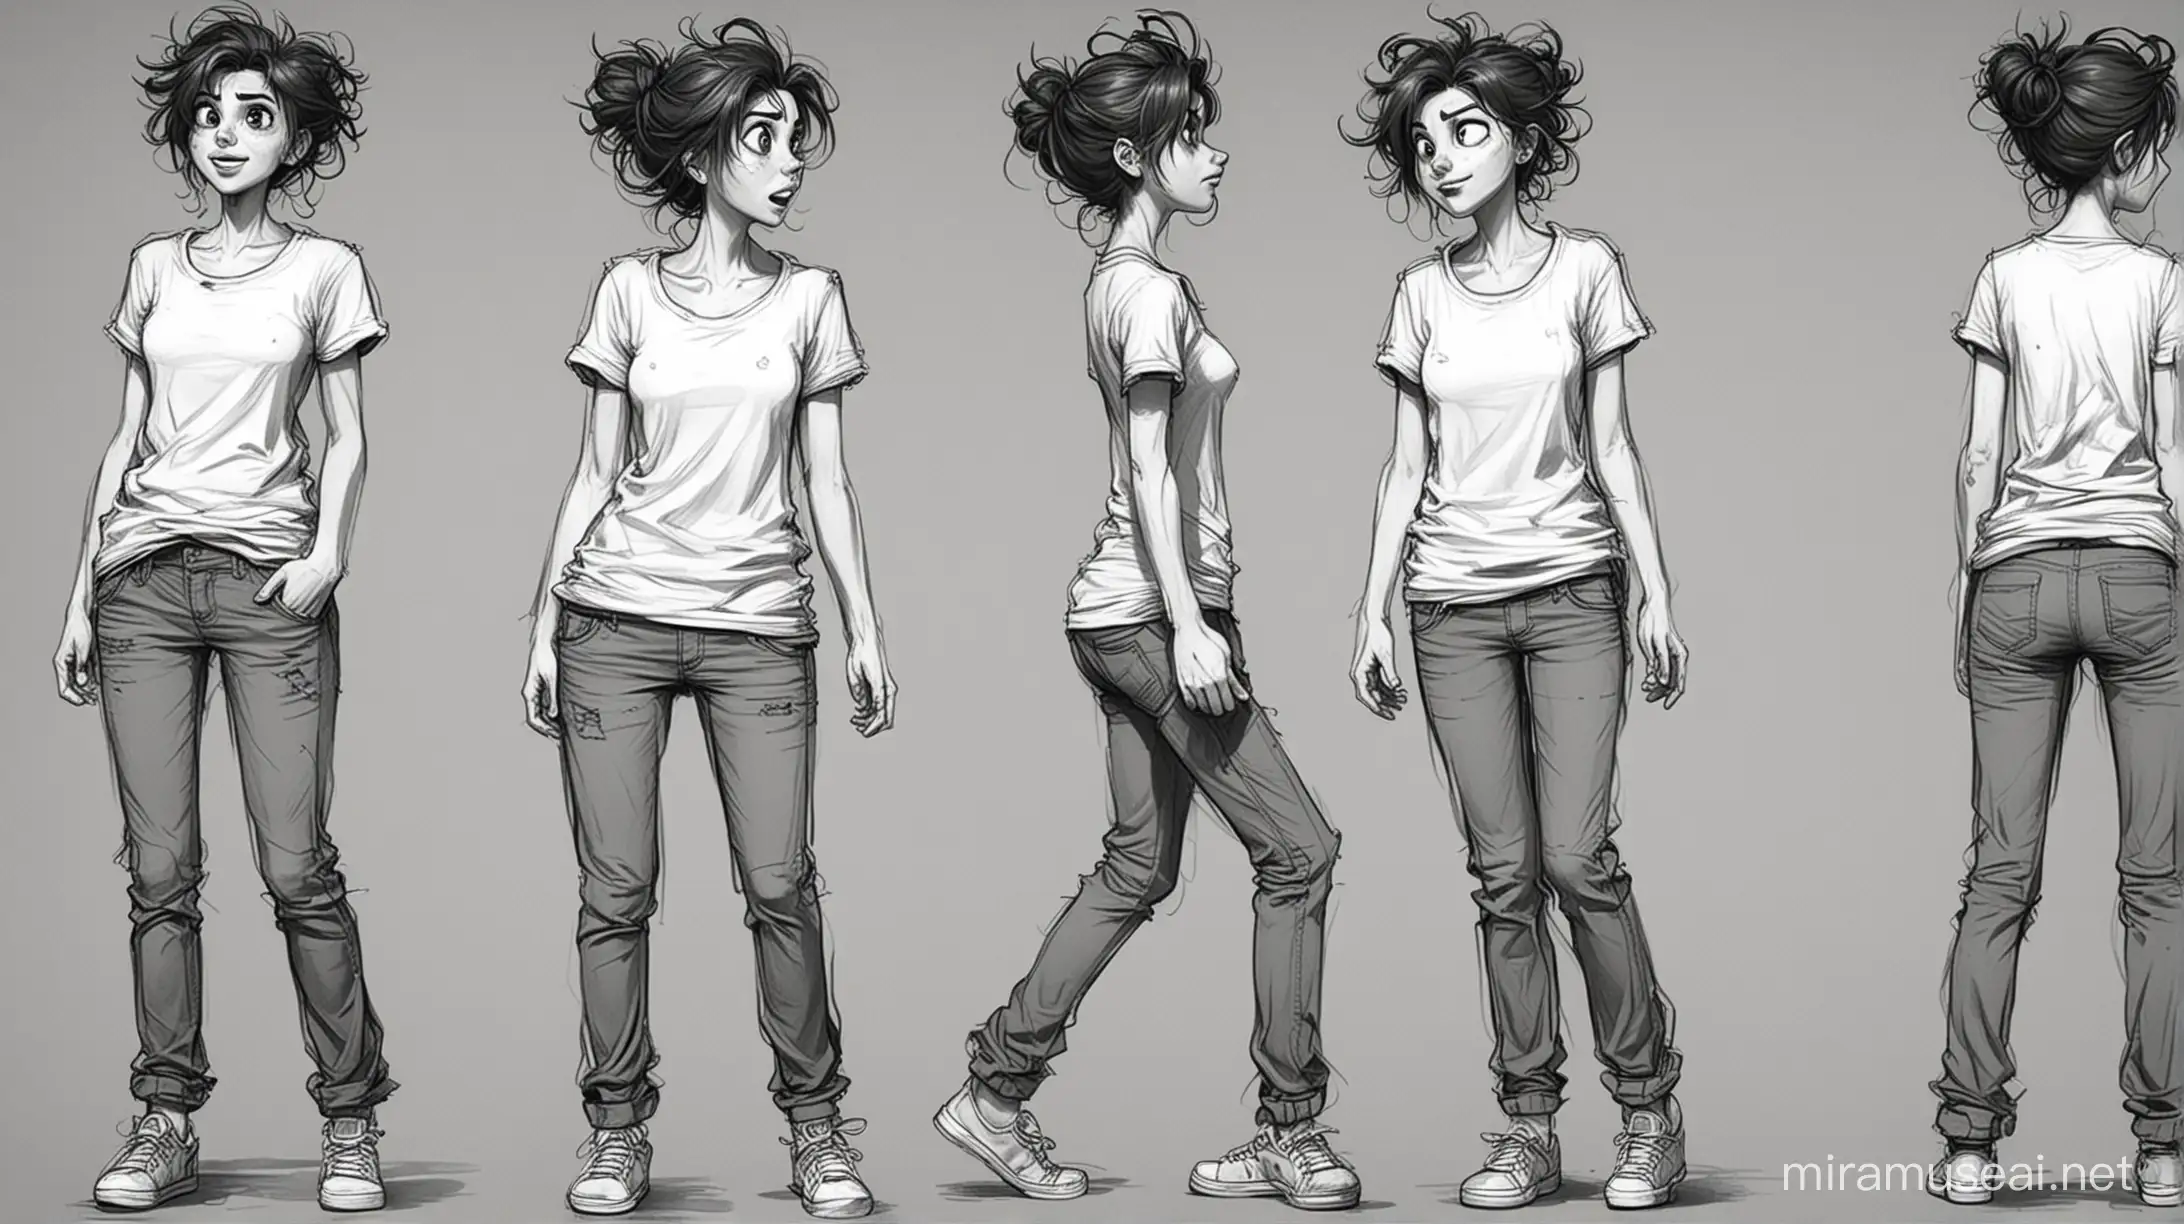 Dynamic Sketches of Quirky Teenage Girl in Monochrome